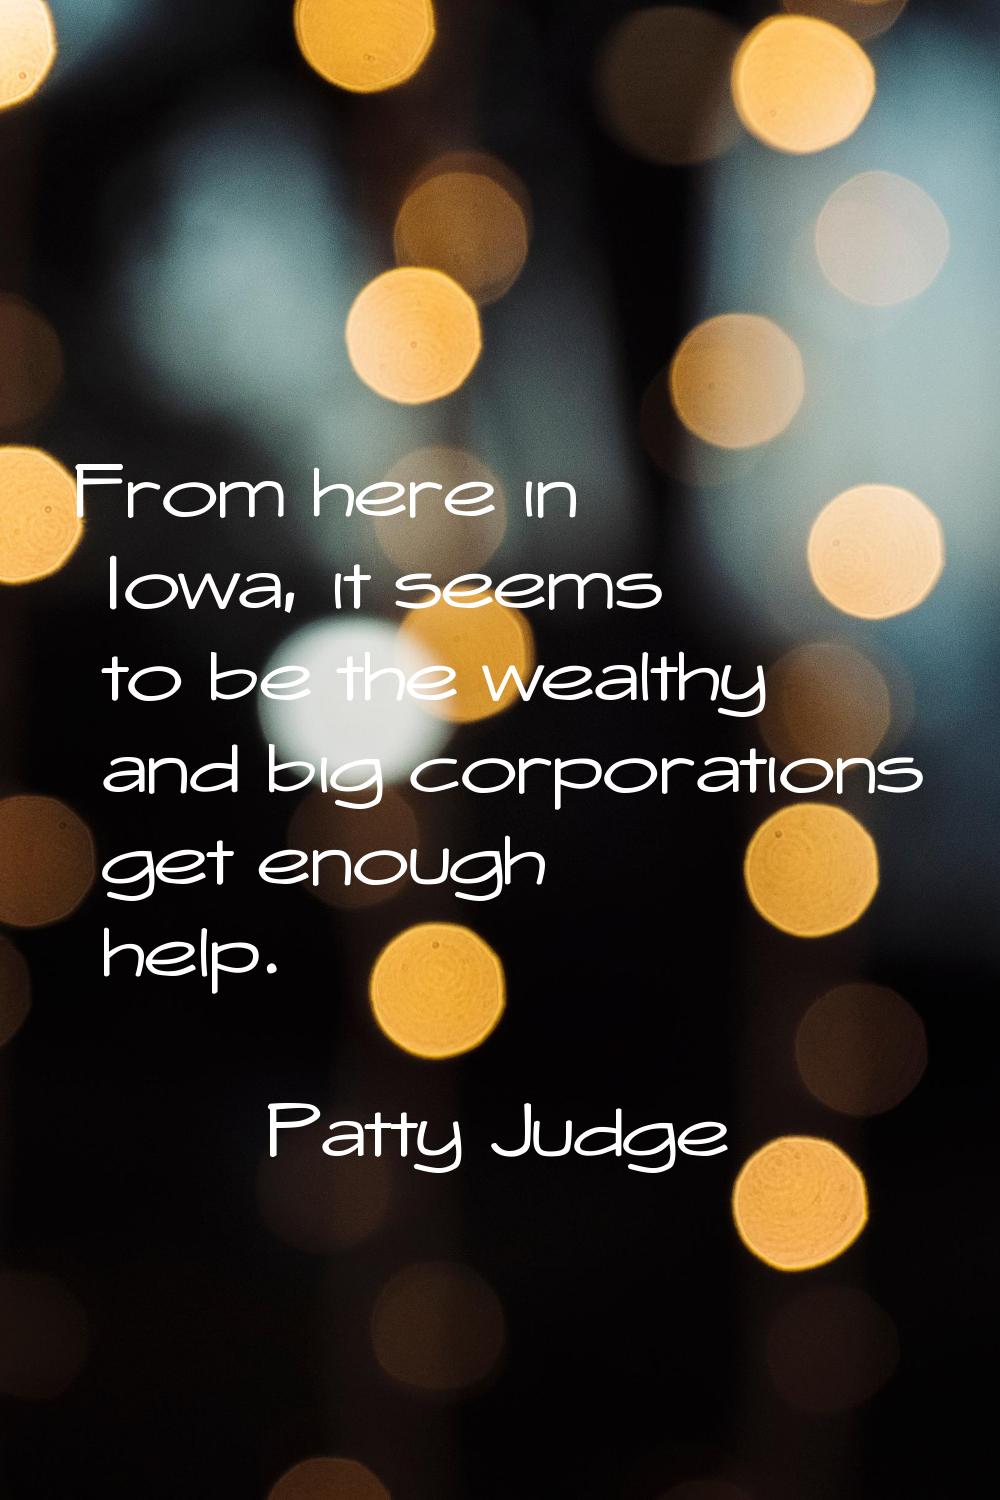 From here in Iowa, it seems to be the wealthy and big corporations get enough help.